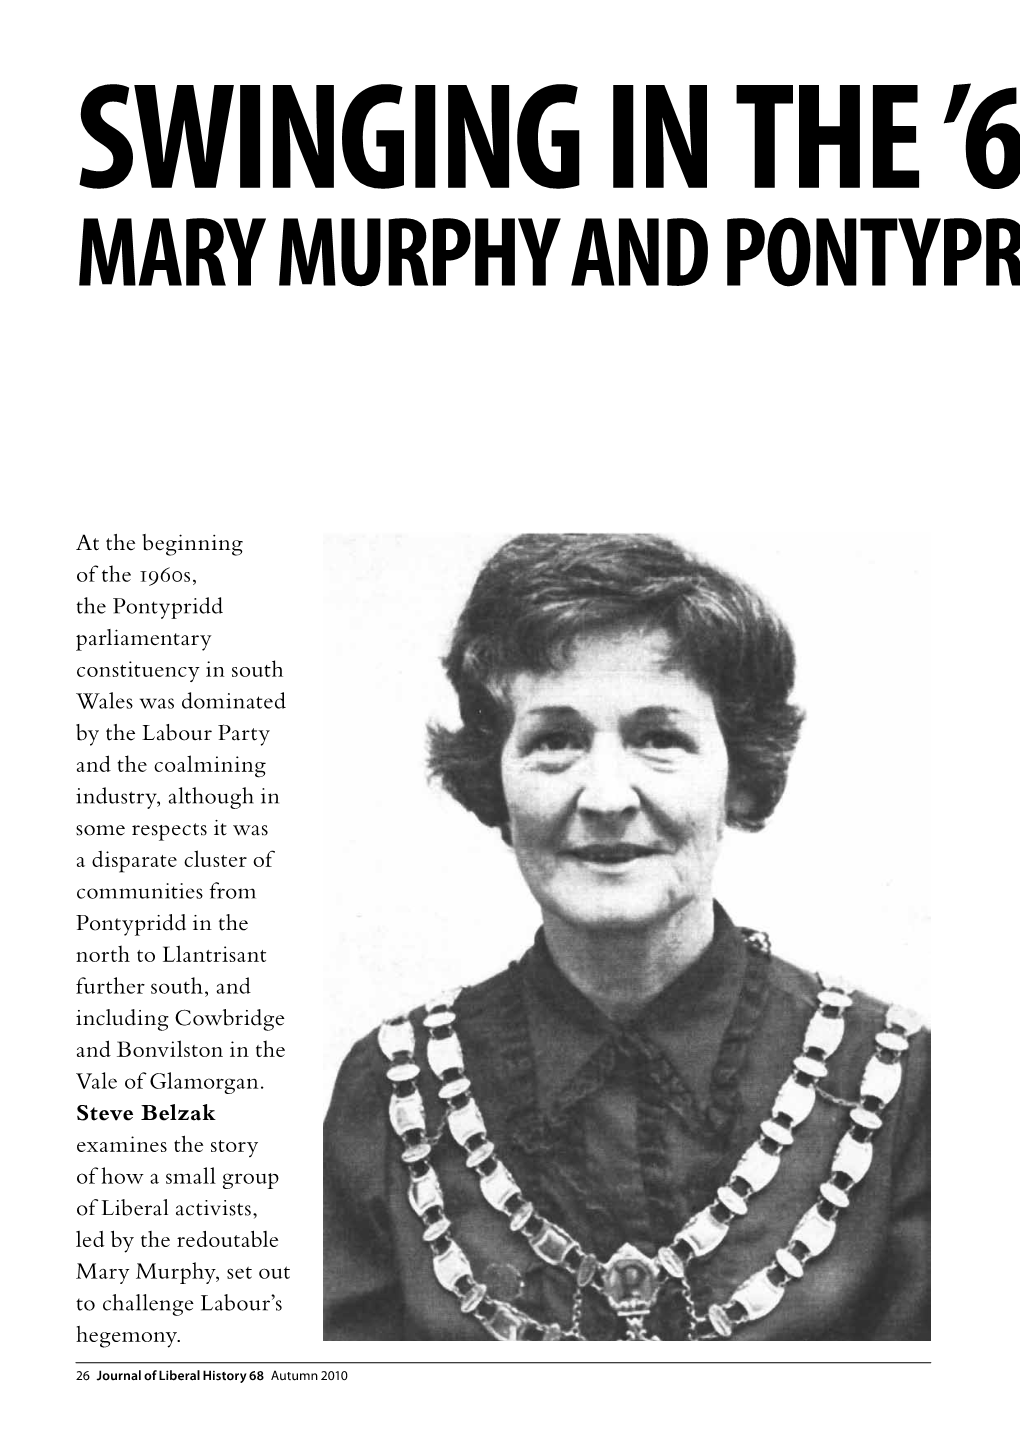 Mary Murphy and Pontypridd Urban District Council